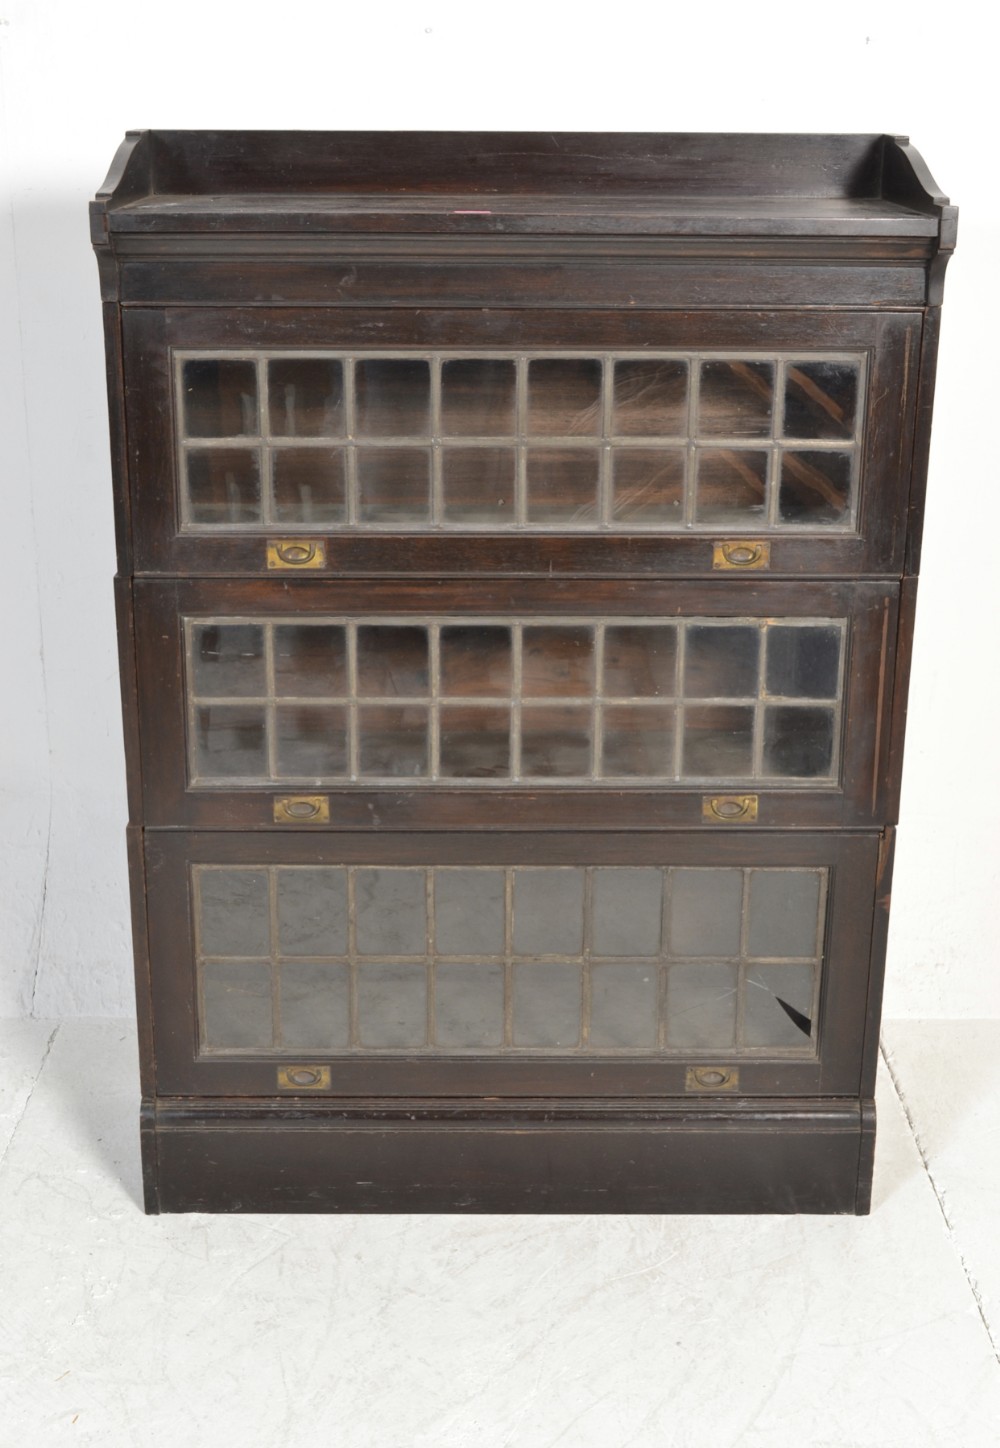 early c20th mahogany globe wernicke style 3 section leaded glass bookcase